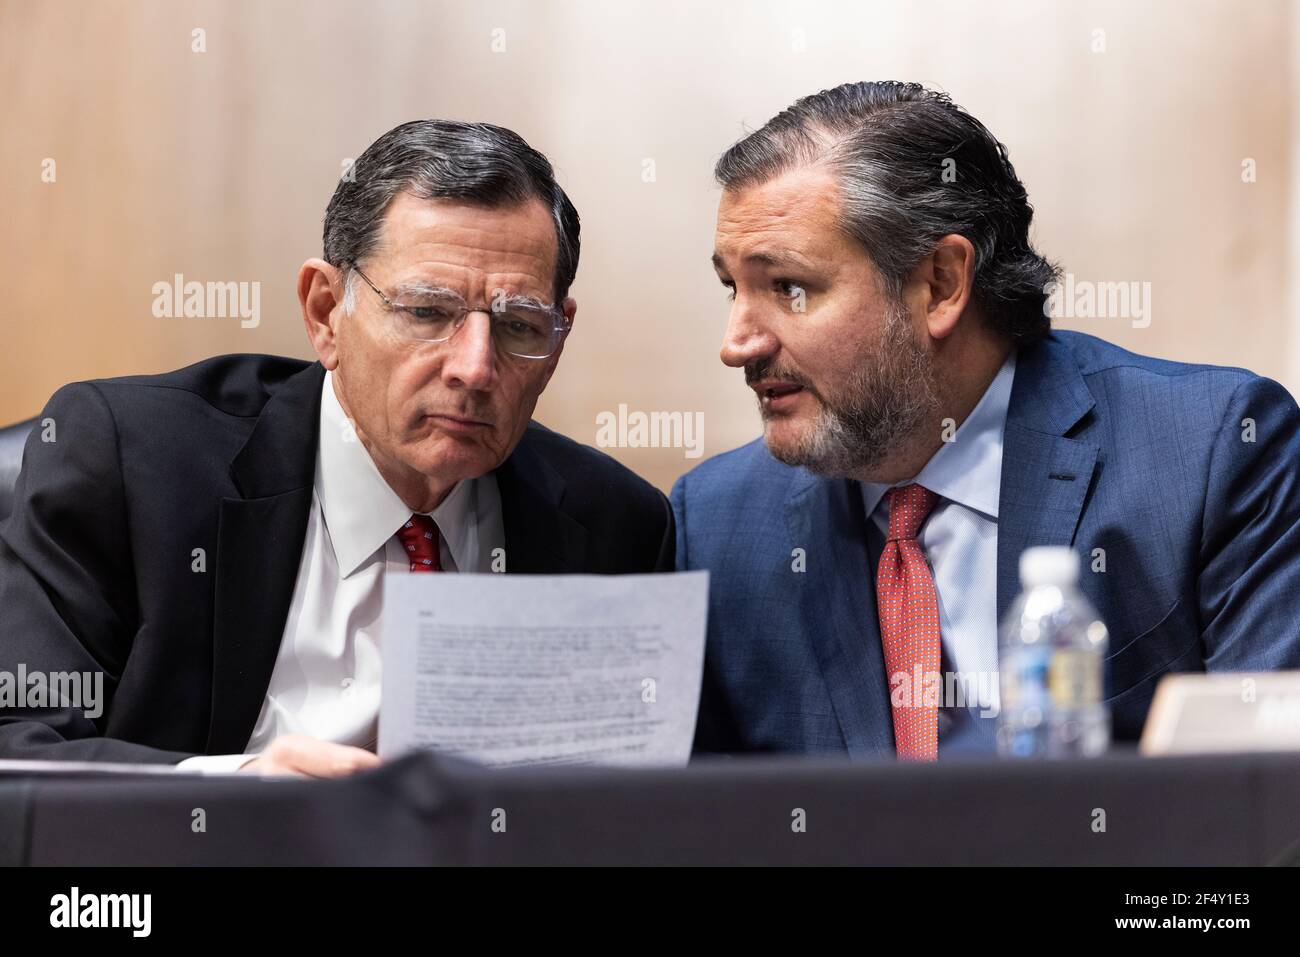 Washington DC, USA. 23rd Mar, 2021. United States Senator Ted Cruz (Republican of Texas) (R) chats with United States Senator John Barrasso (Republican of Wyoming) (L) as they question former US Ambassador to the United Nations Samantha Power (not pictured) as she testifies before the Senate Foreign Relations Committee to be the next Administrator of the United States Agency for International Development (USAID) in the Dirksen Senate Office Building in Washington DC, USA, 23 March 2021.Credit: Jim LoScalzo/Pool via CNP | usage worldwide Credit: dpa/Alamy Live News Stock Photo